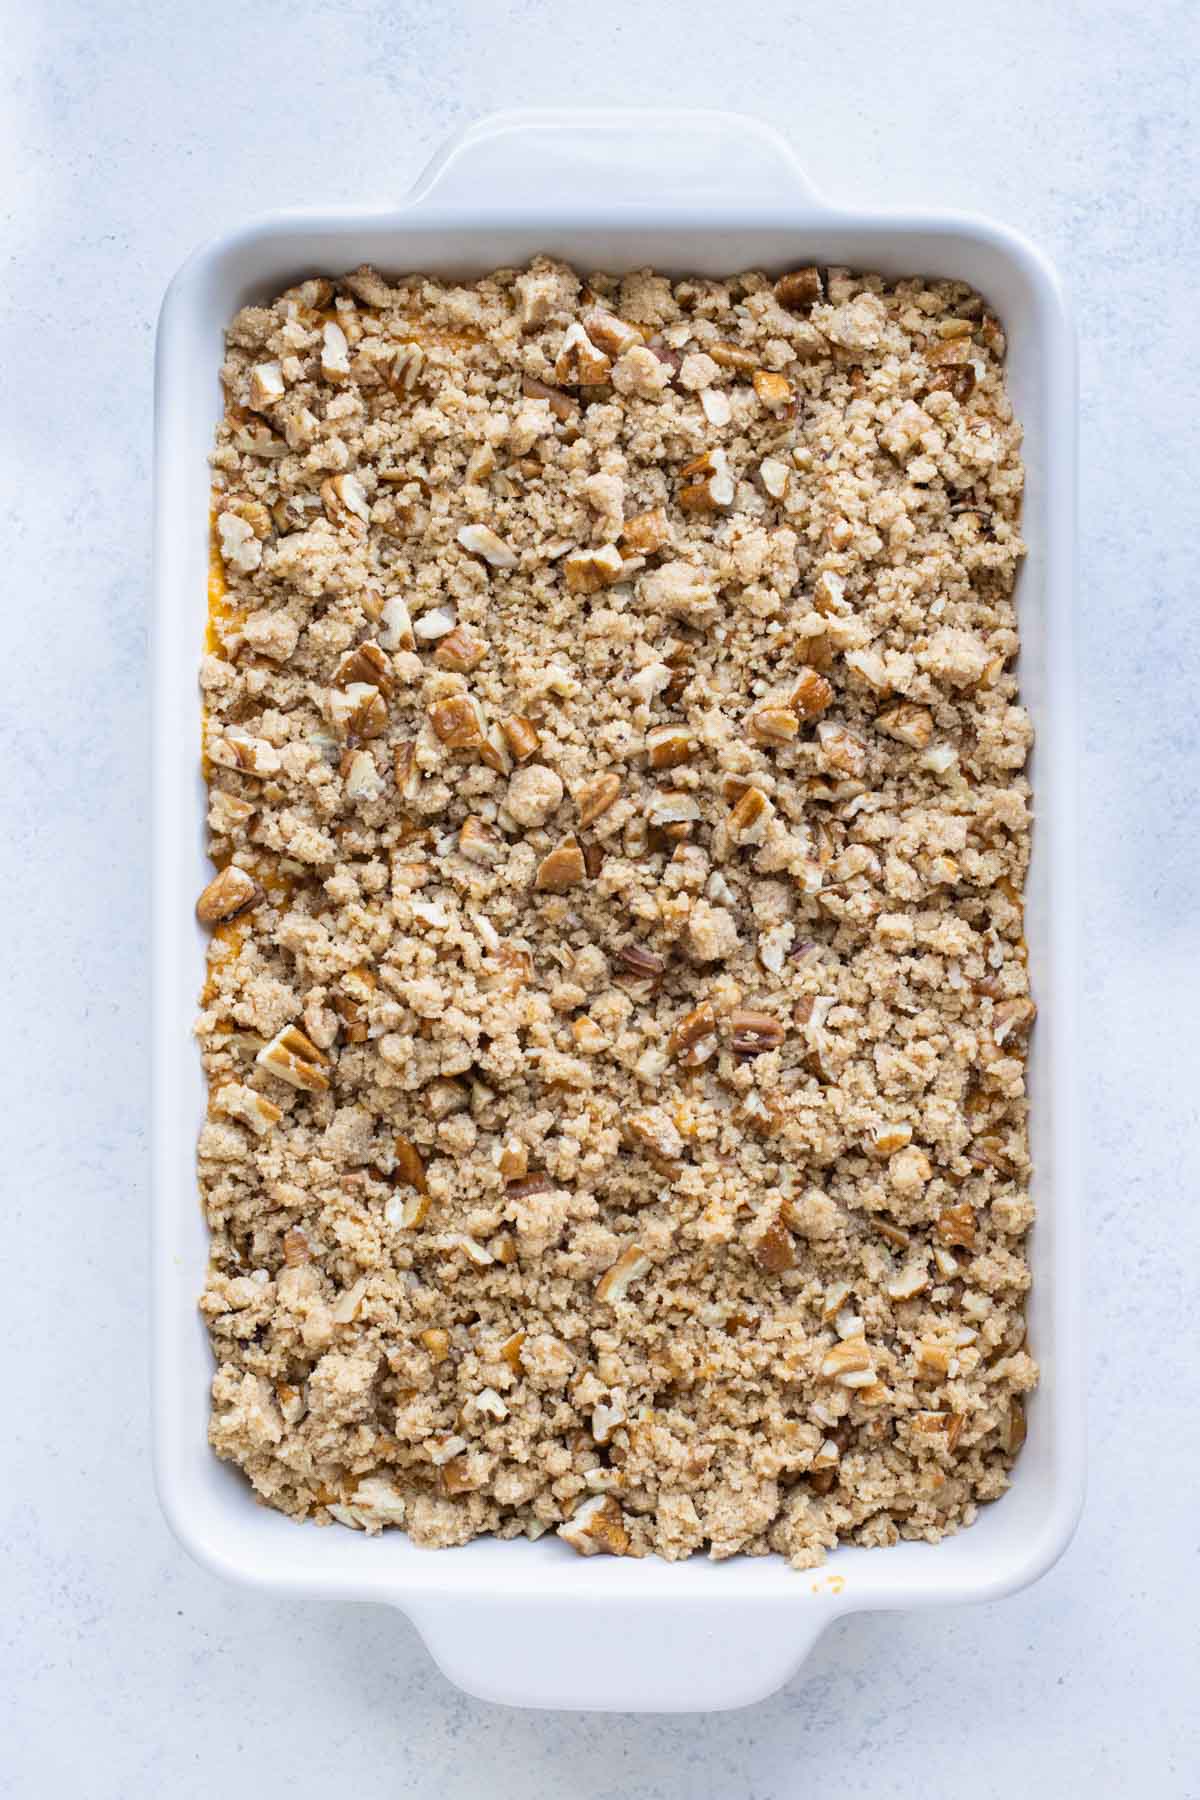 Sweet potato filling is topped with a pecan crumble.